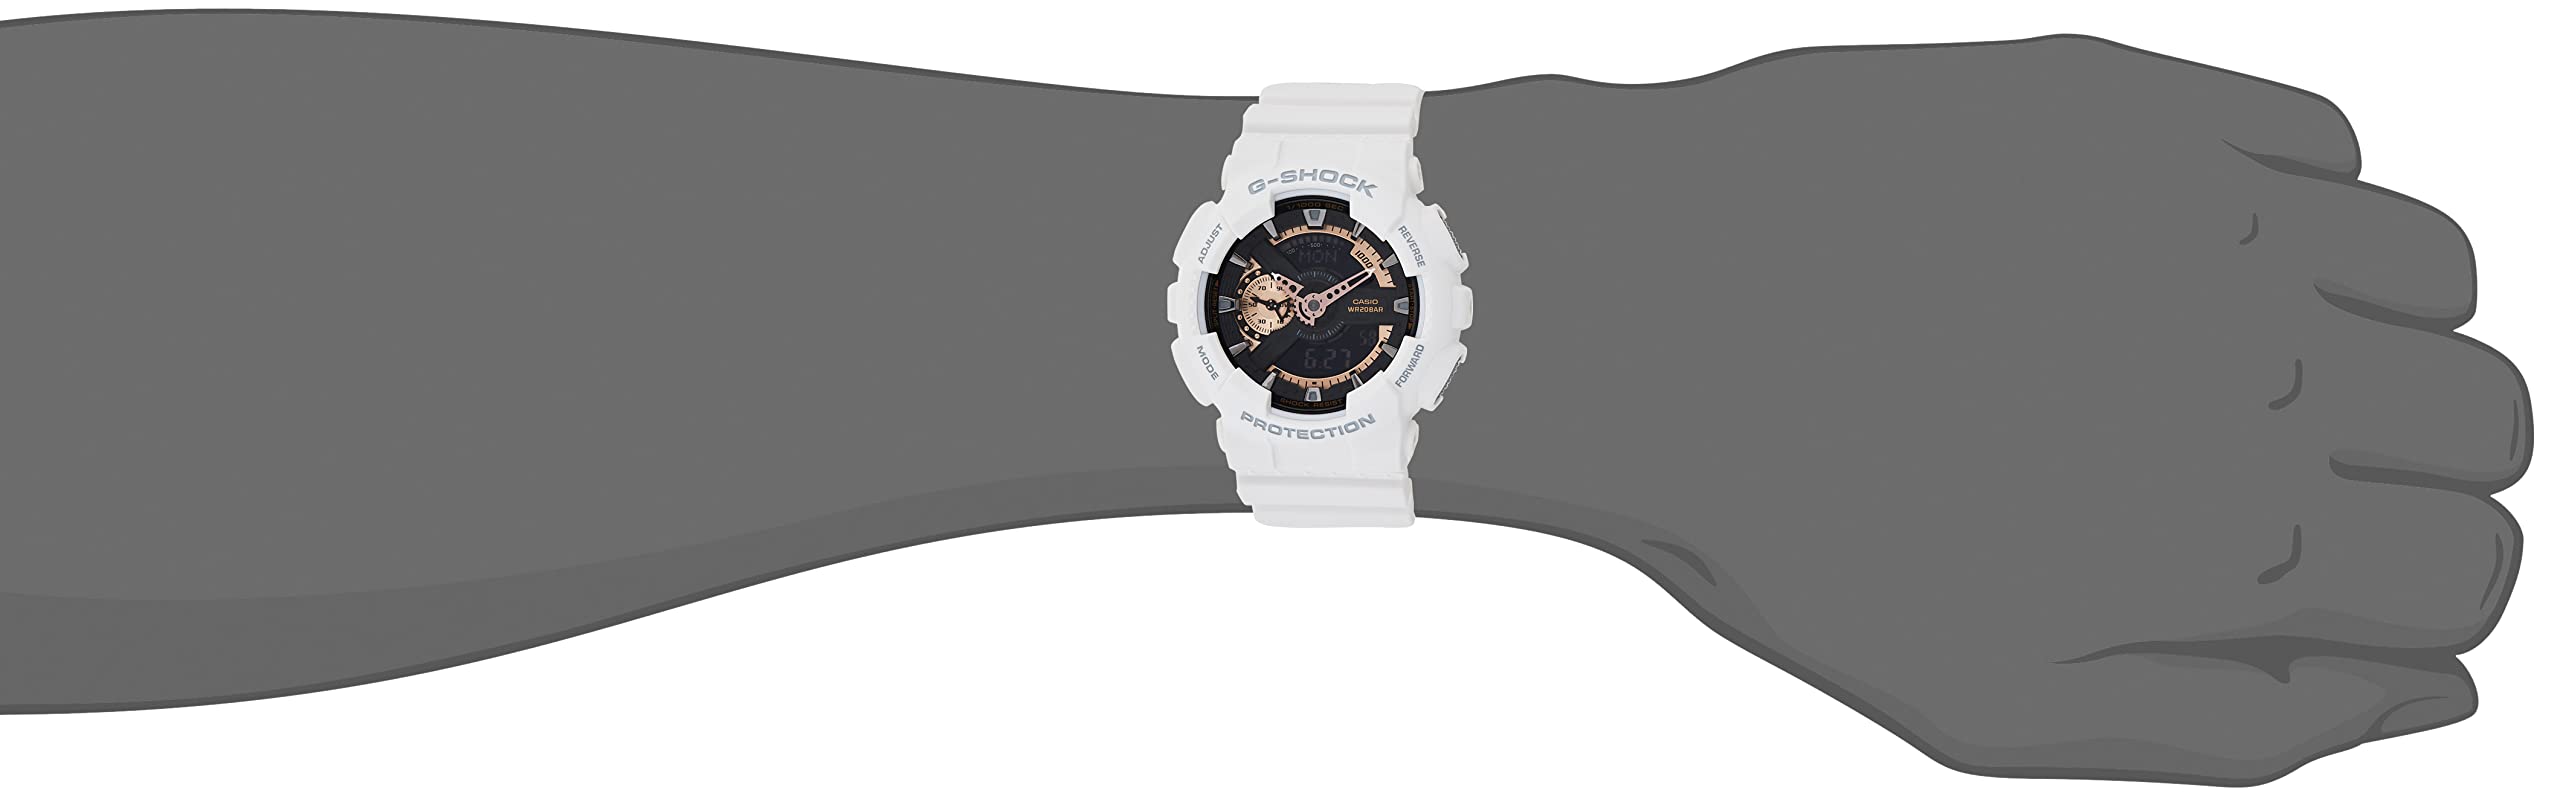 G-Shock Men's Crystal Watch Color: White